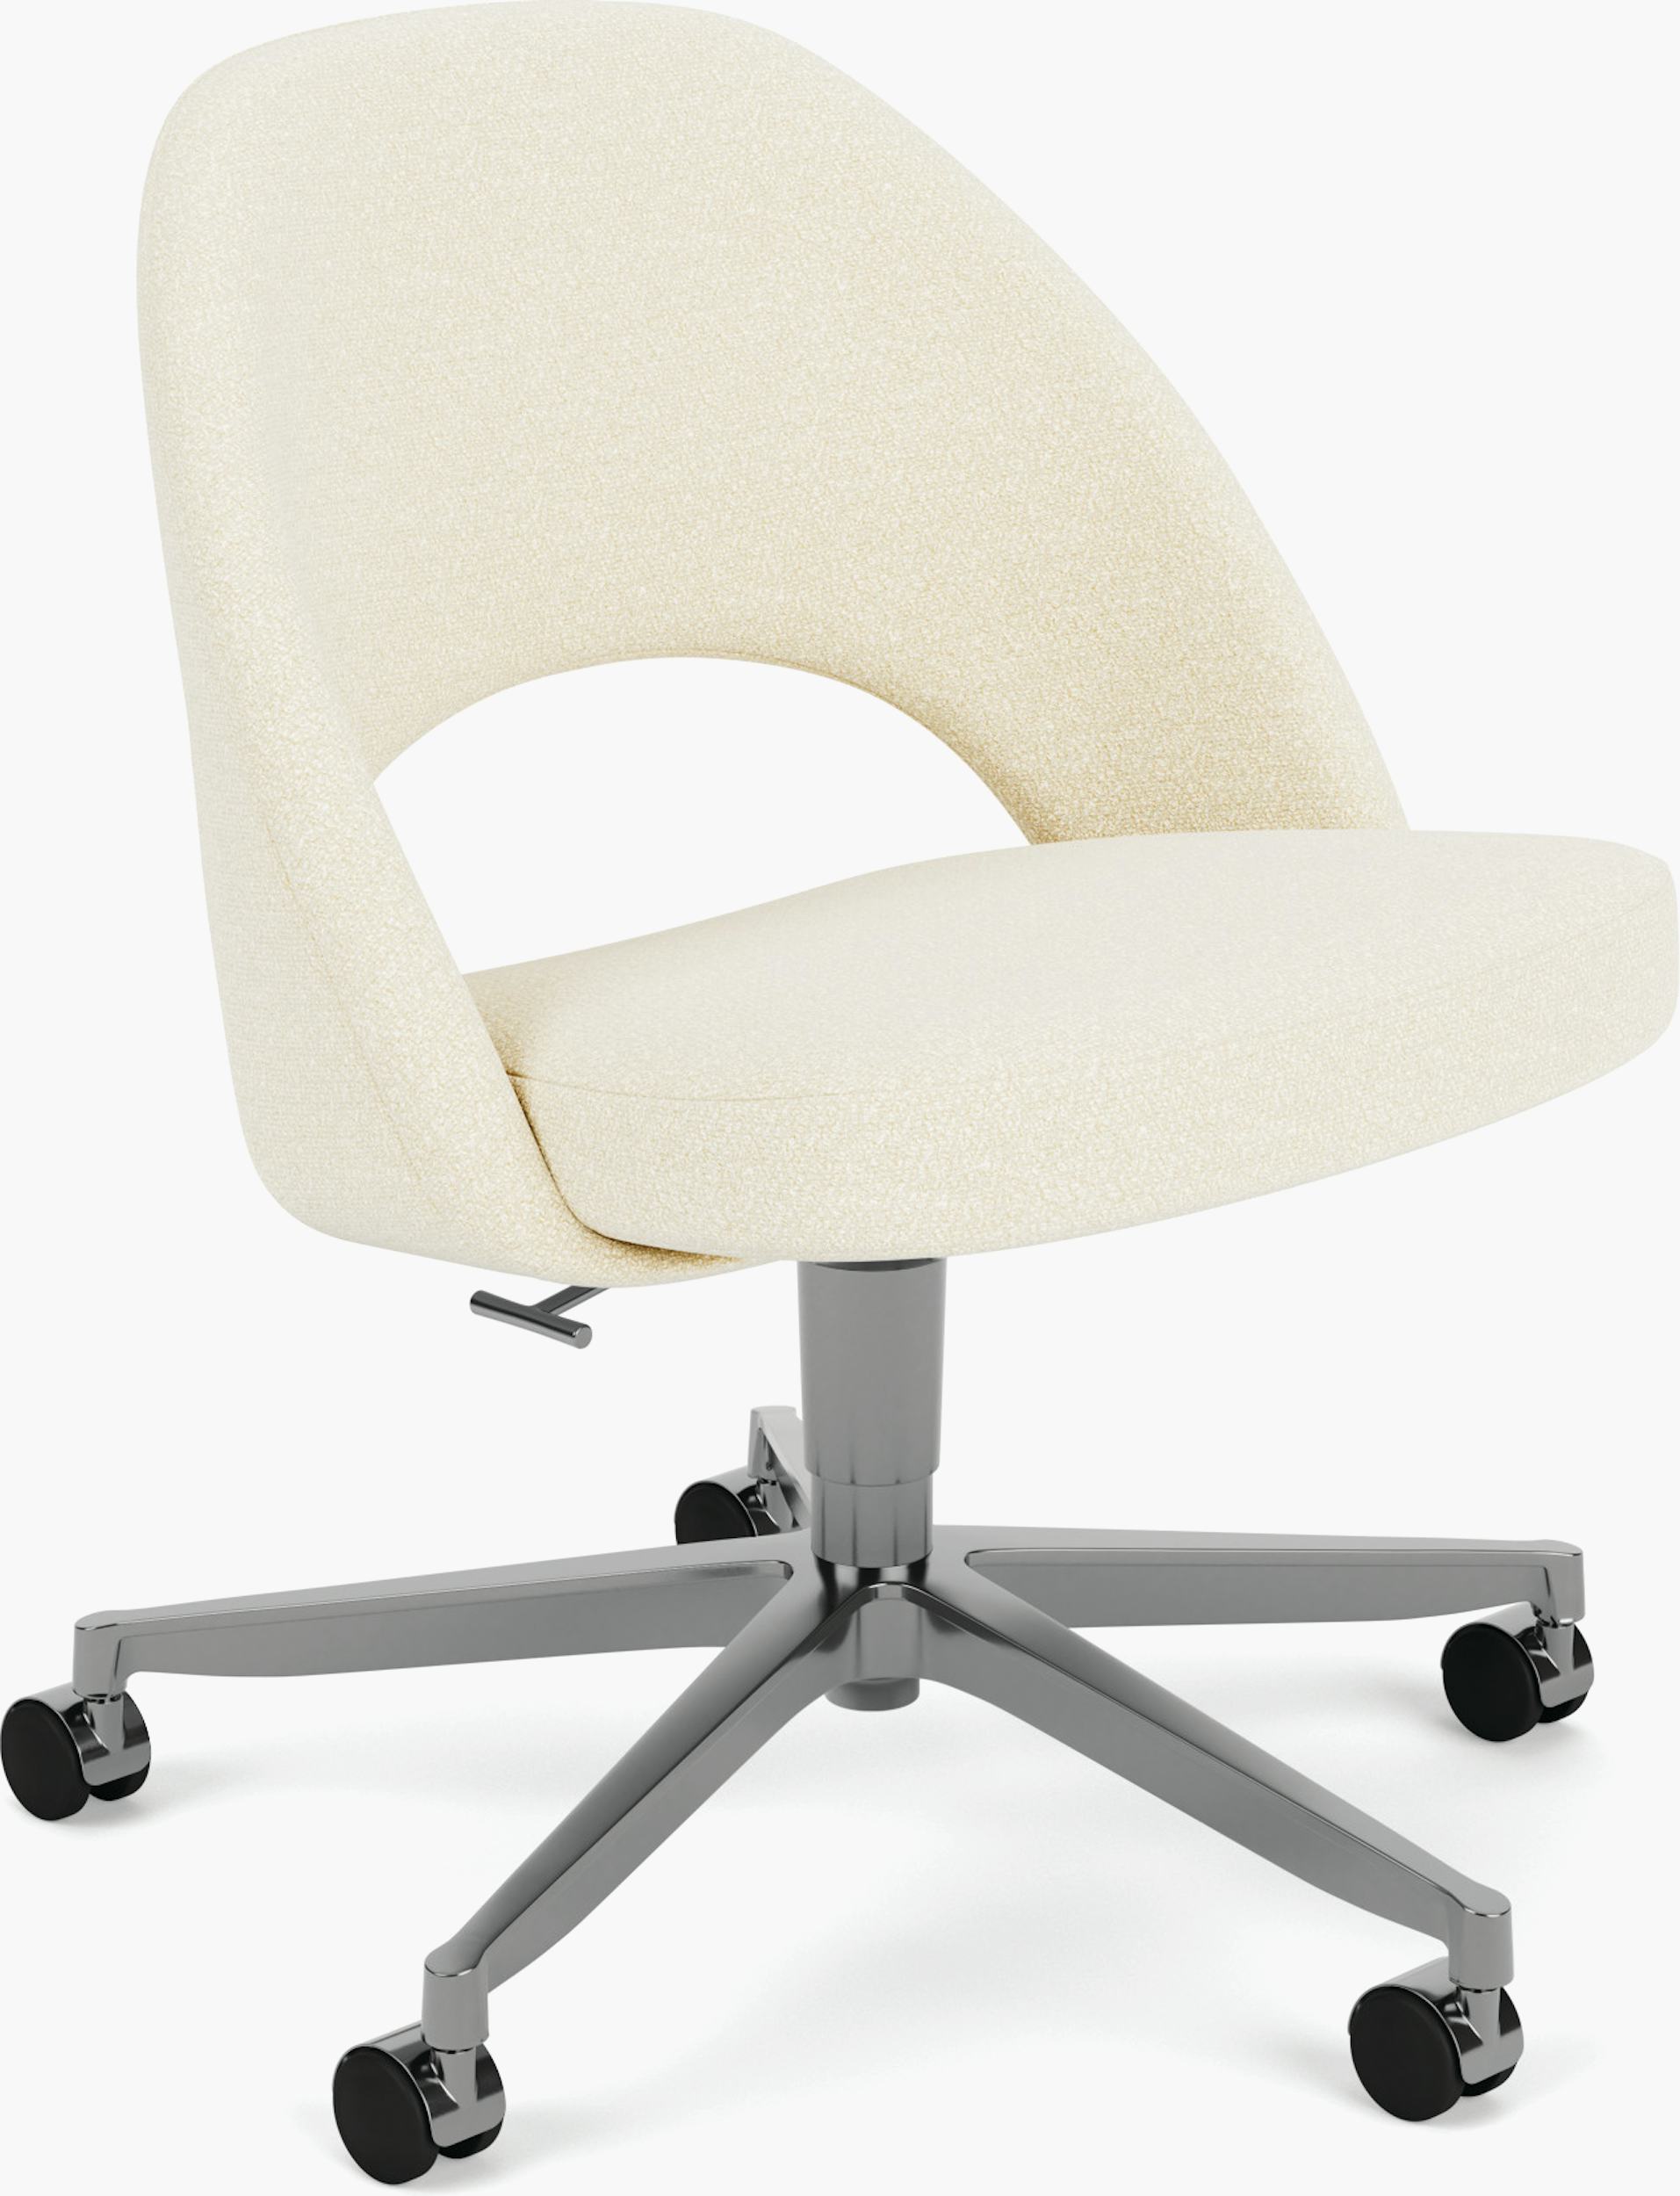 Saarinen Executive Office Side Chair, Cement at Design Within Reach